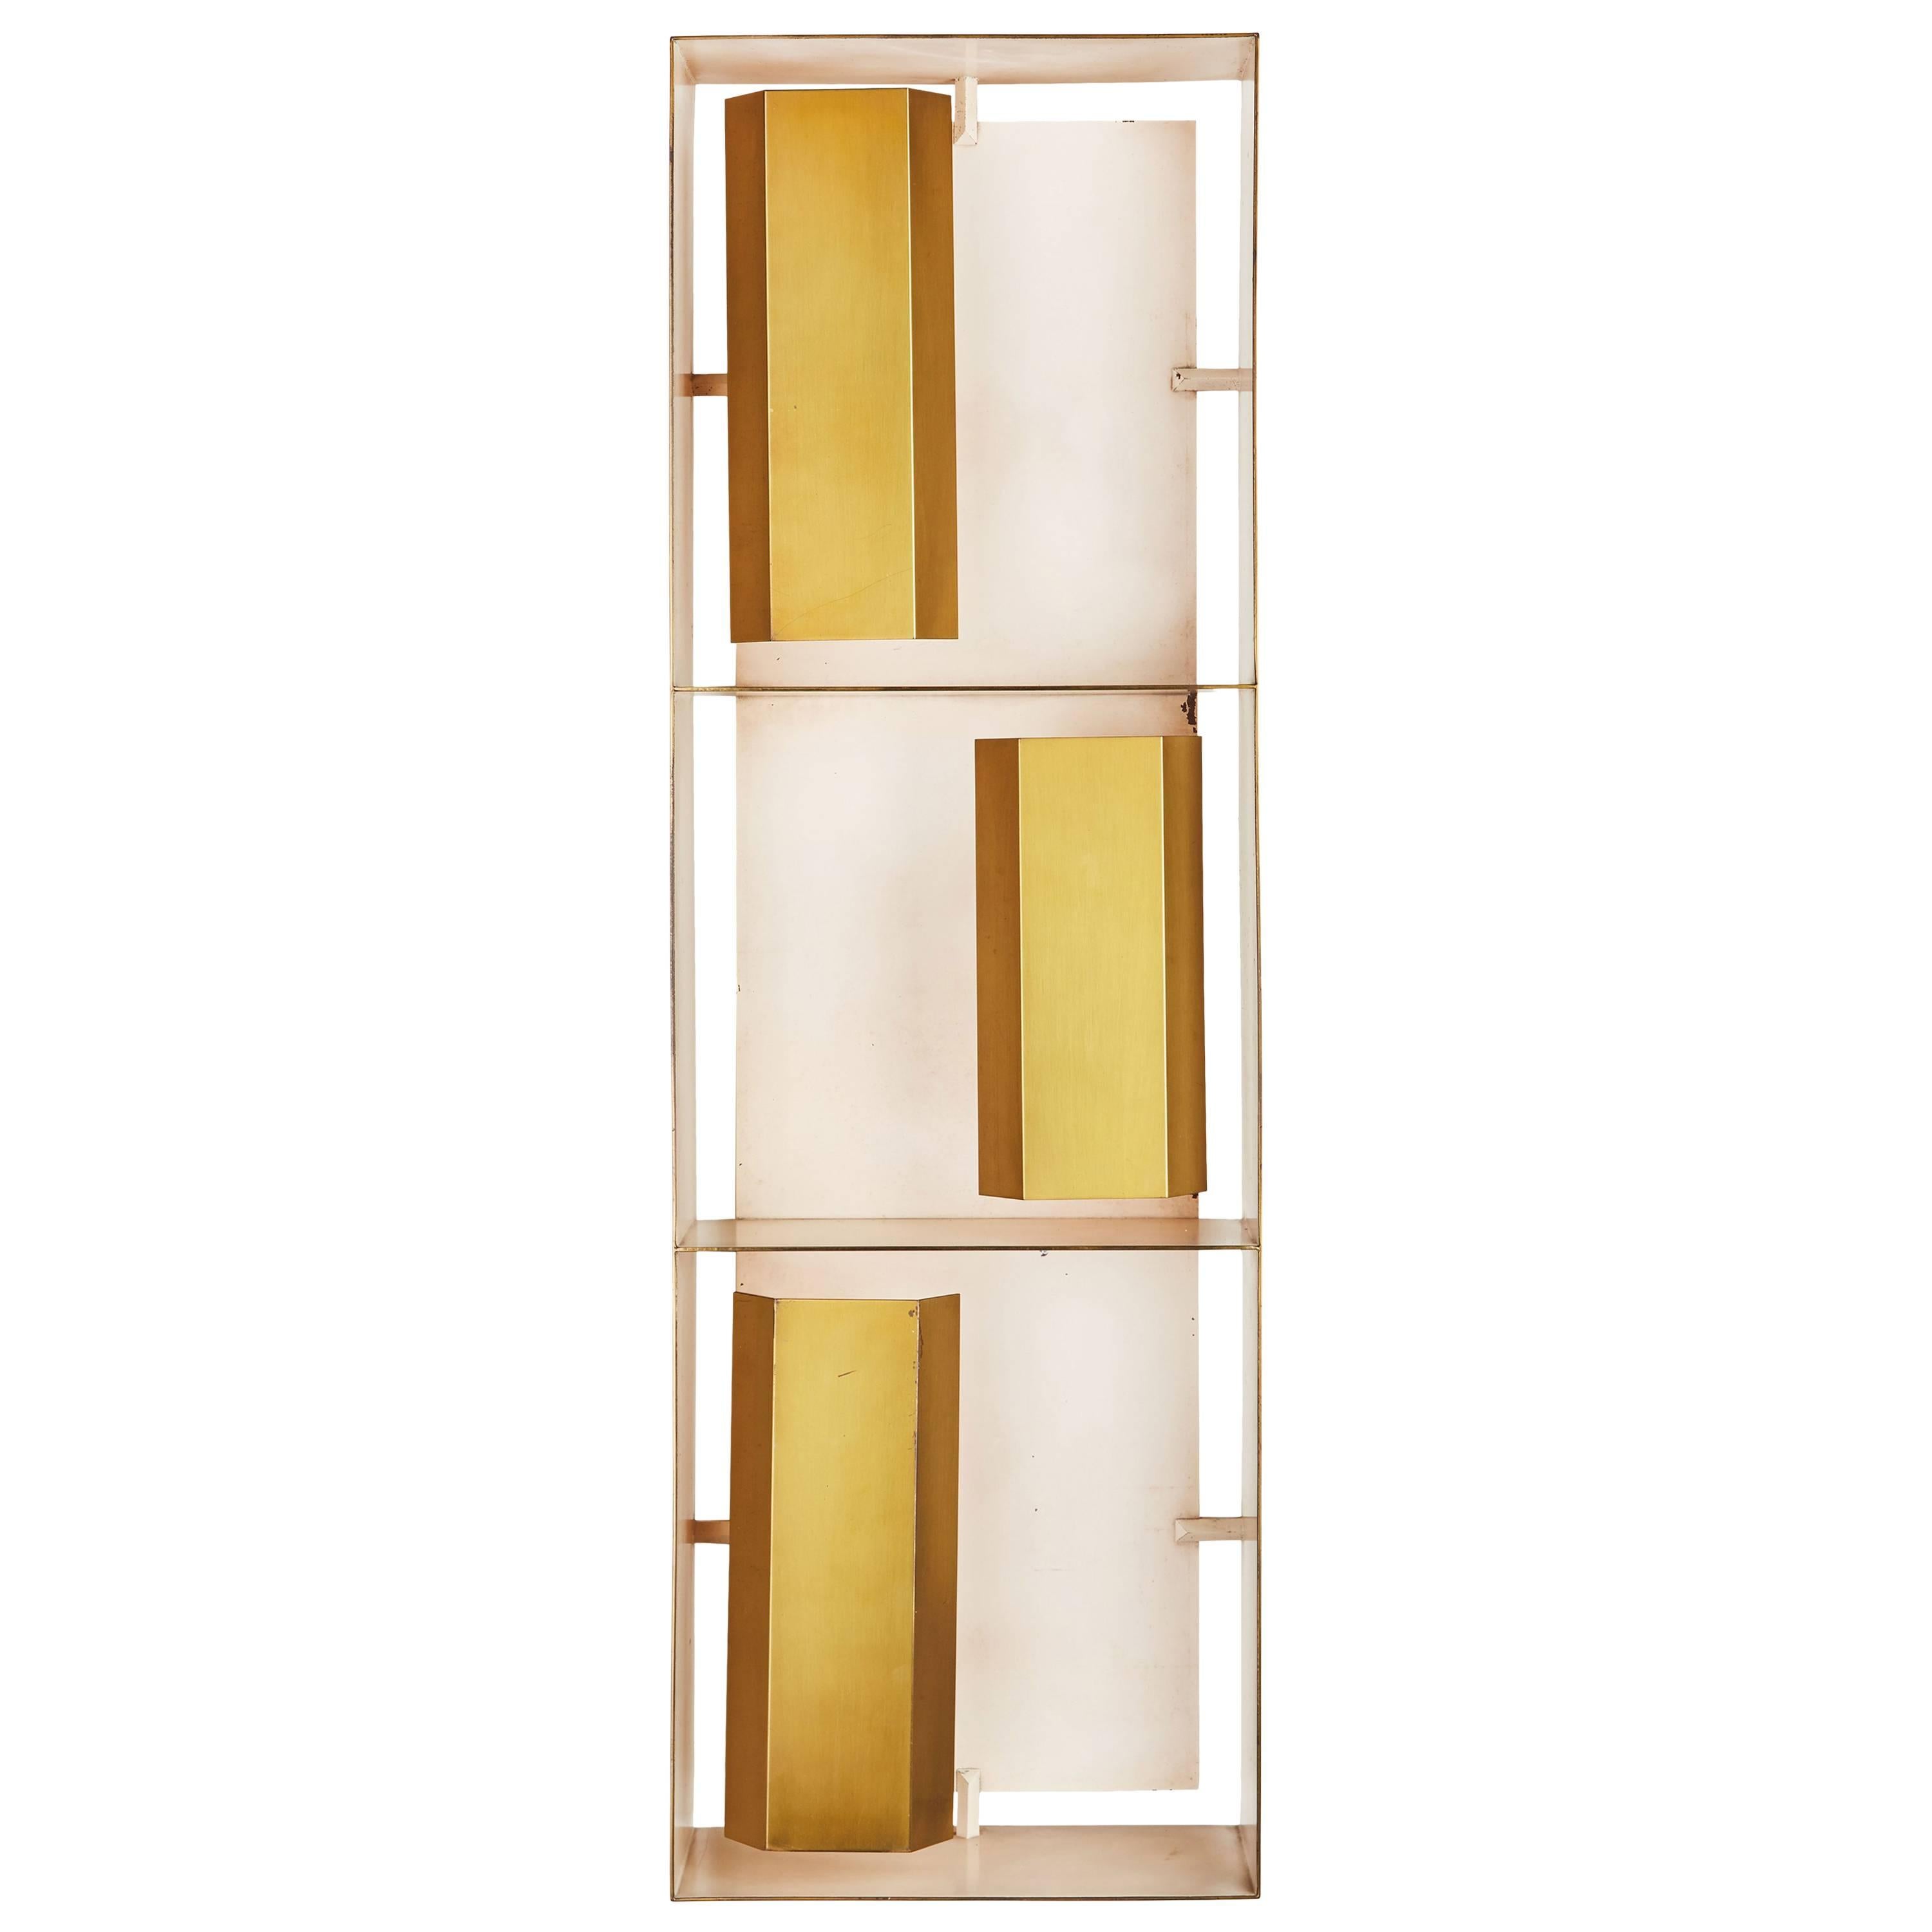 Rare Brass Wall Light by Gio Ponti for Arredoluce